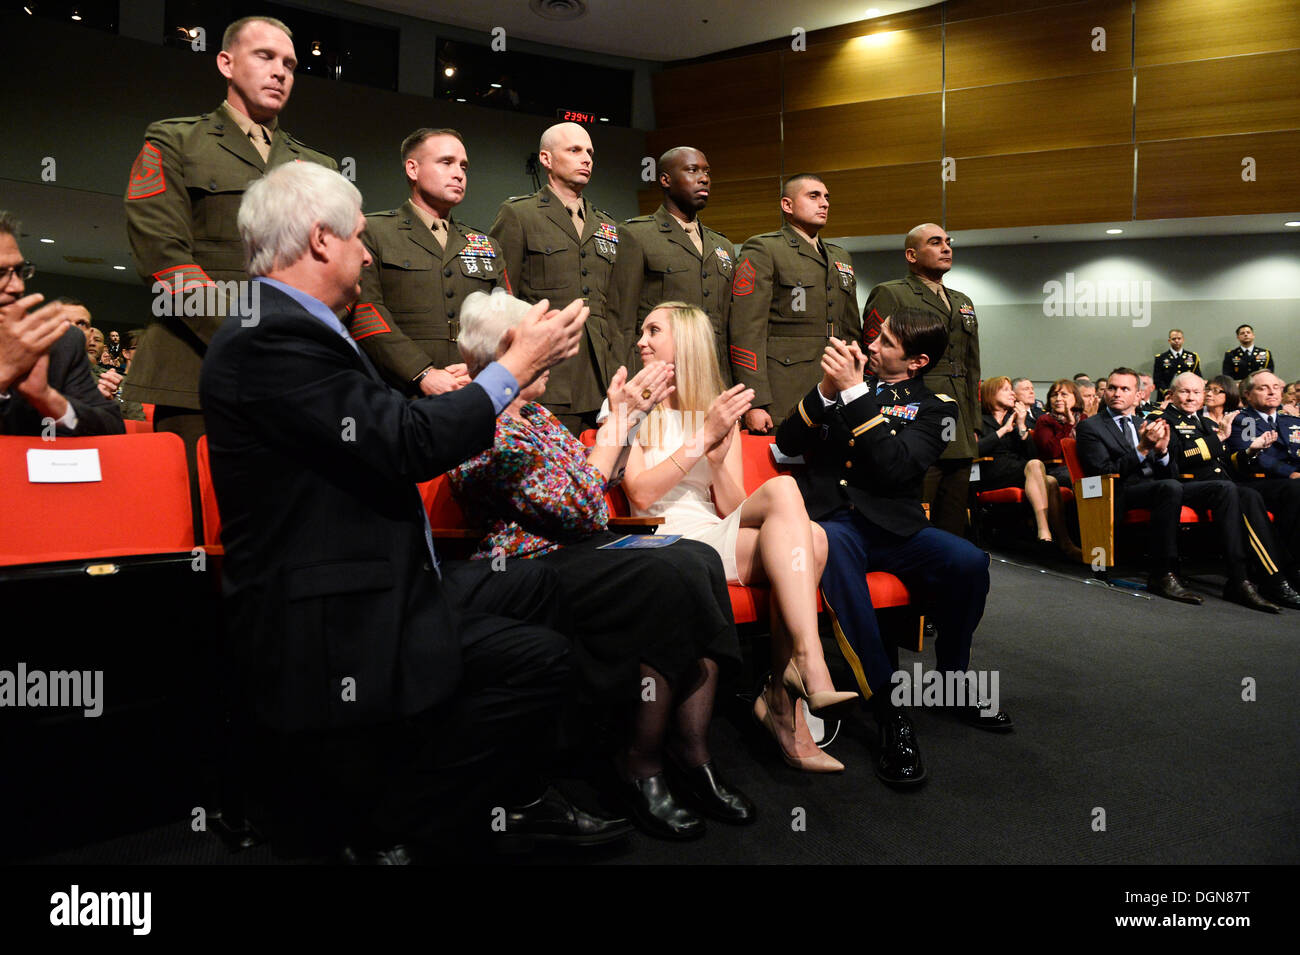 Former U.S. Army Capt. William D. Swenson, a Medal of Honor recipient, and his family applaud members of his team during the battle of Ganjgal at his Hall of Heroes Induction ceremony at the Pentagon in Washington, D.C., Oct 16, 2013. Stock Photo